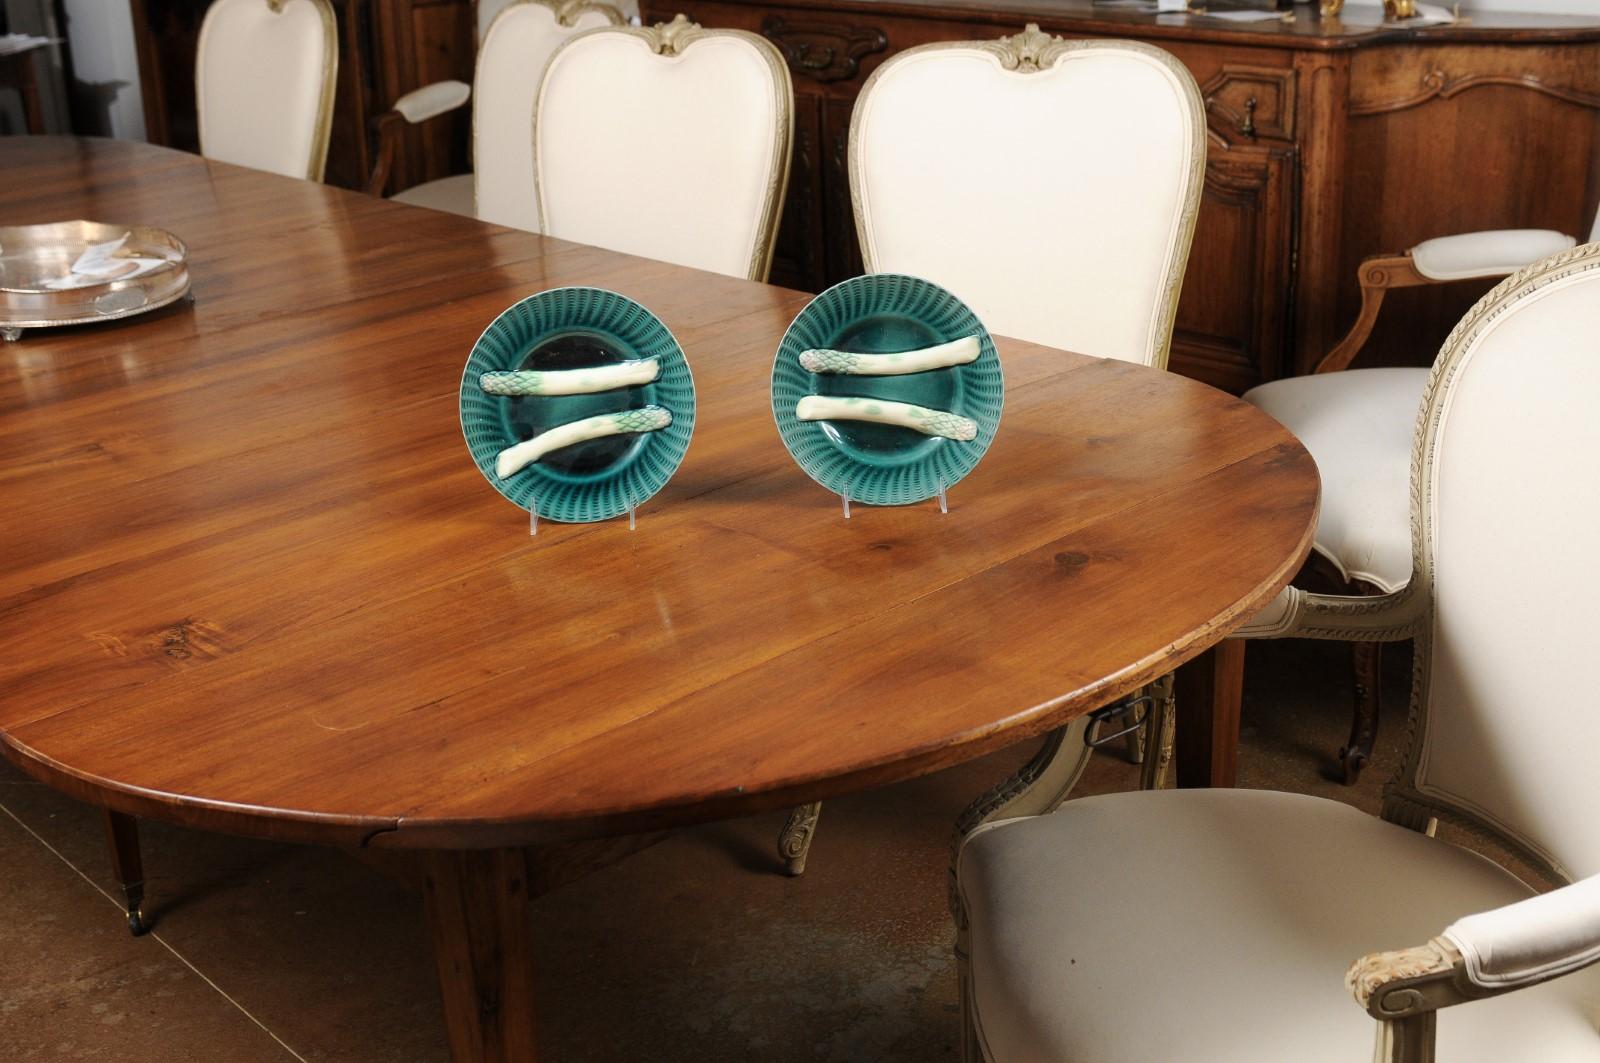 Pair of French 20th Century Asparagus Plates with Aqua Color and Rippled Accents In Good Condition For Sale In Atlanta, GA